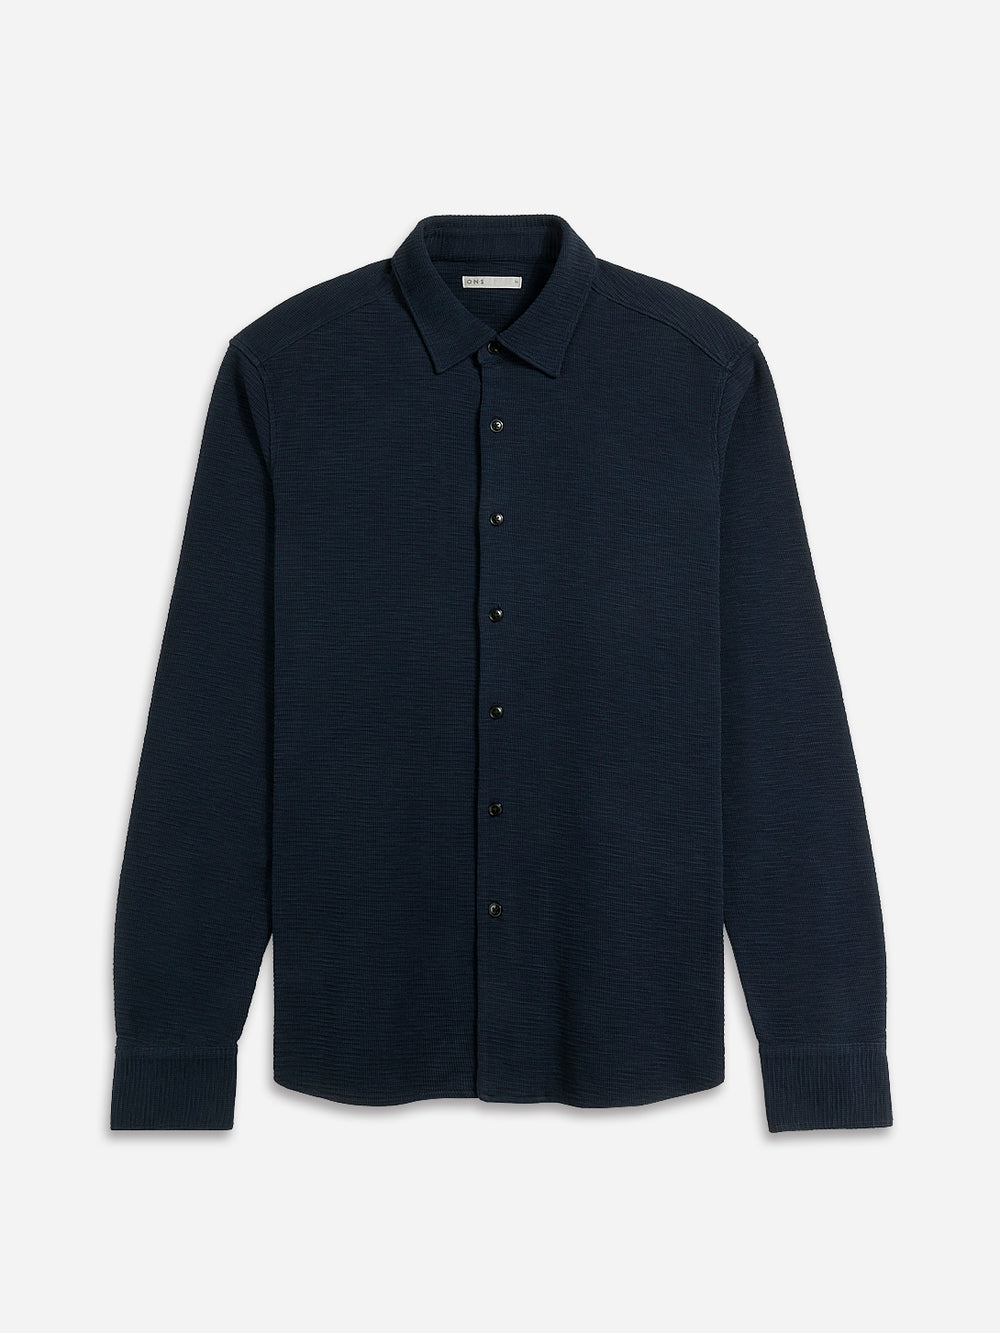 Navy Darcy Knit Men's O.N.S Button Up Shirt